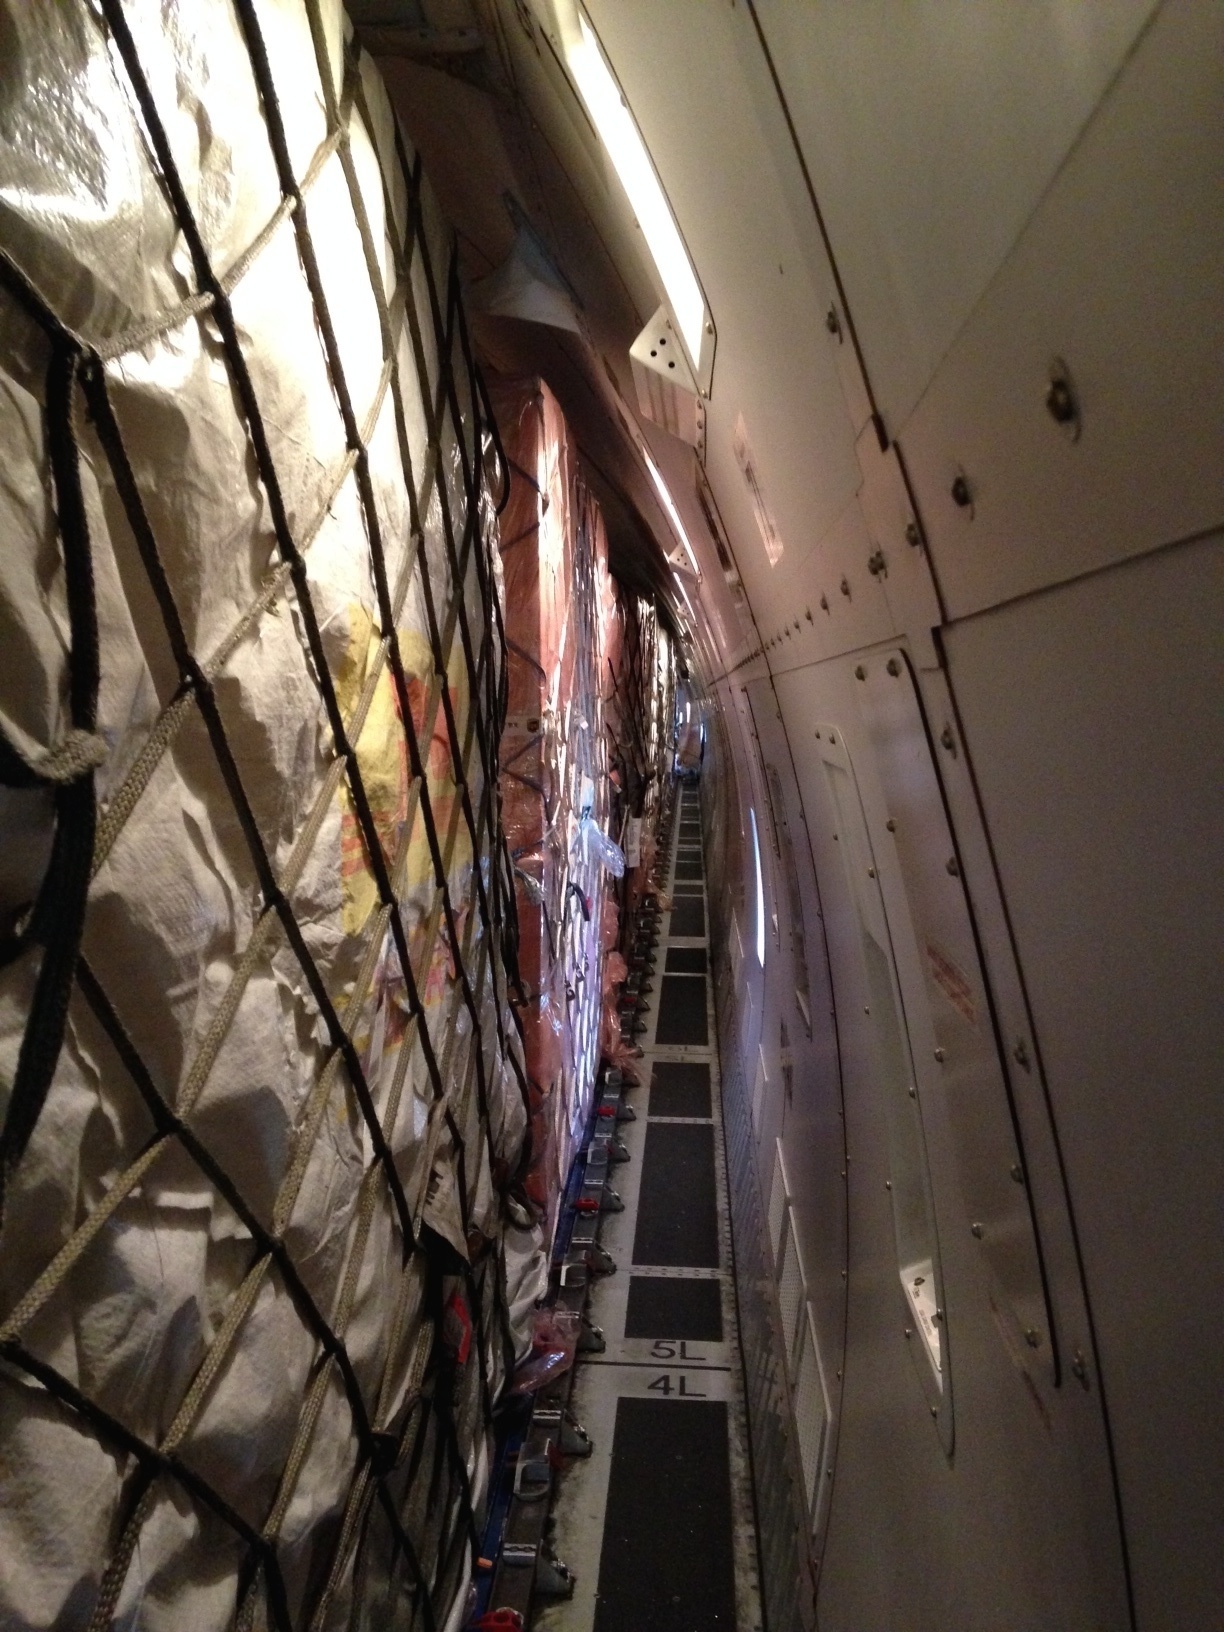 Pilot Posts Photos of 195,000 iPhone 6 Units Being Flown From China to the U.S.